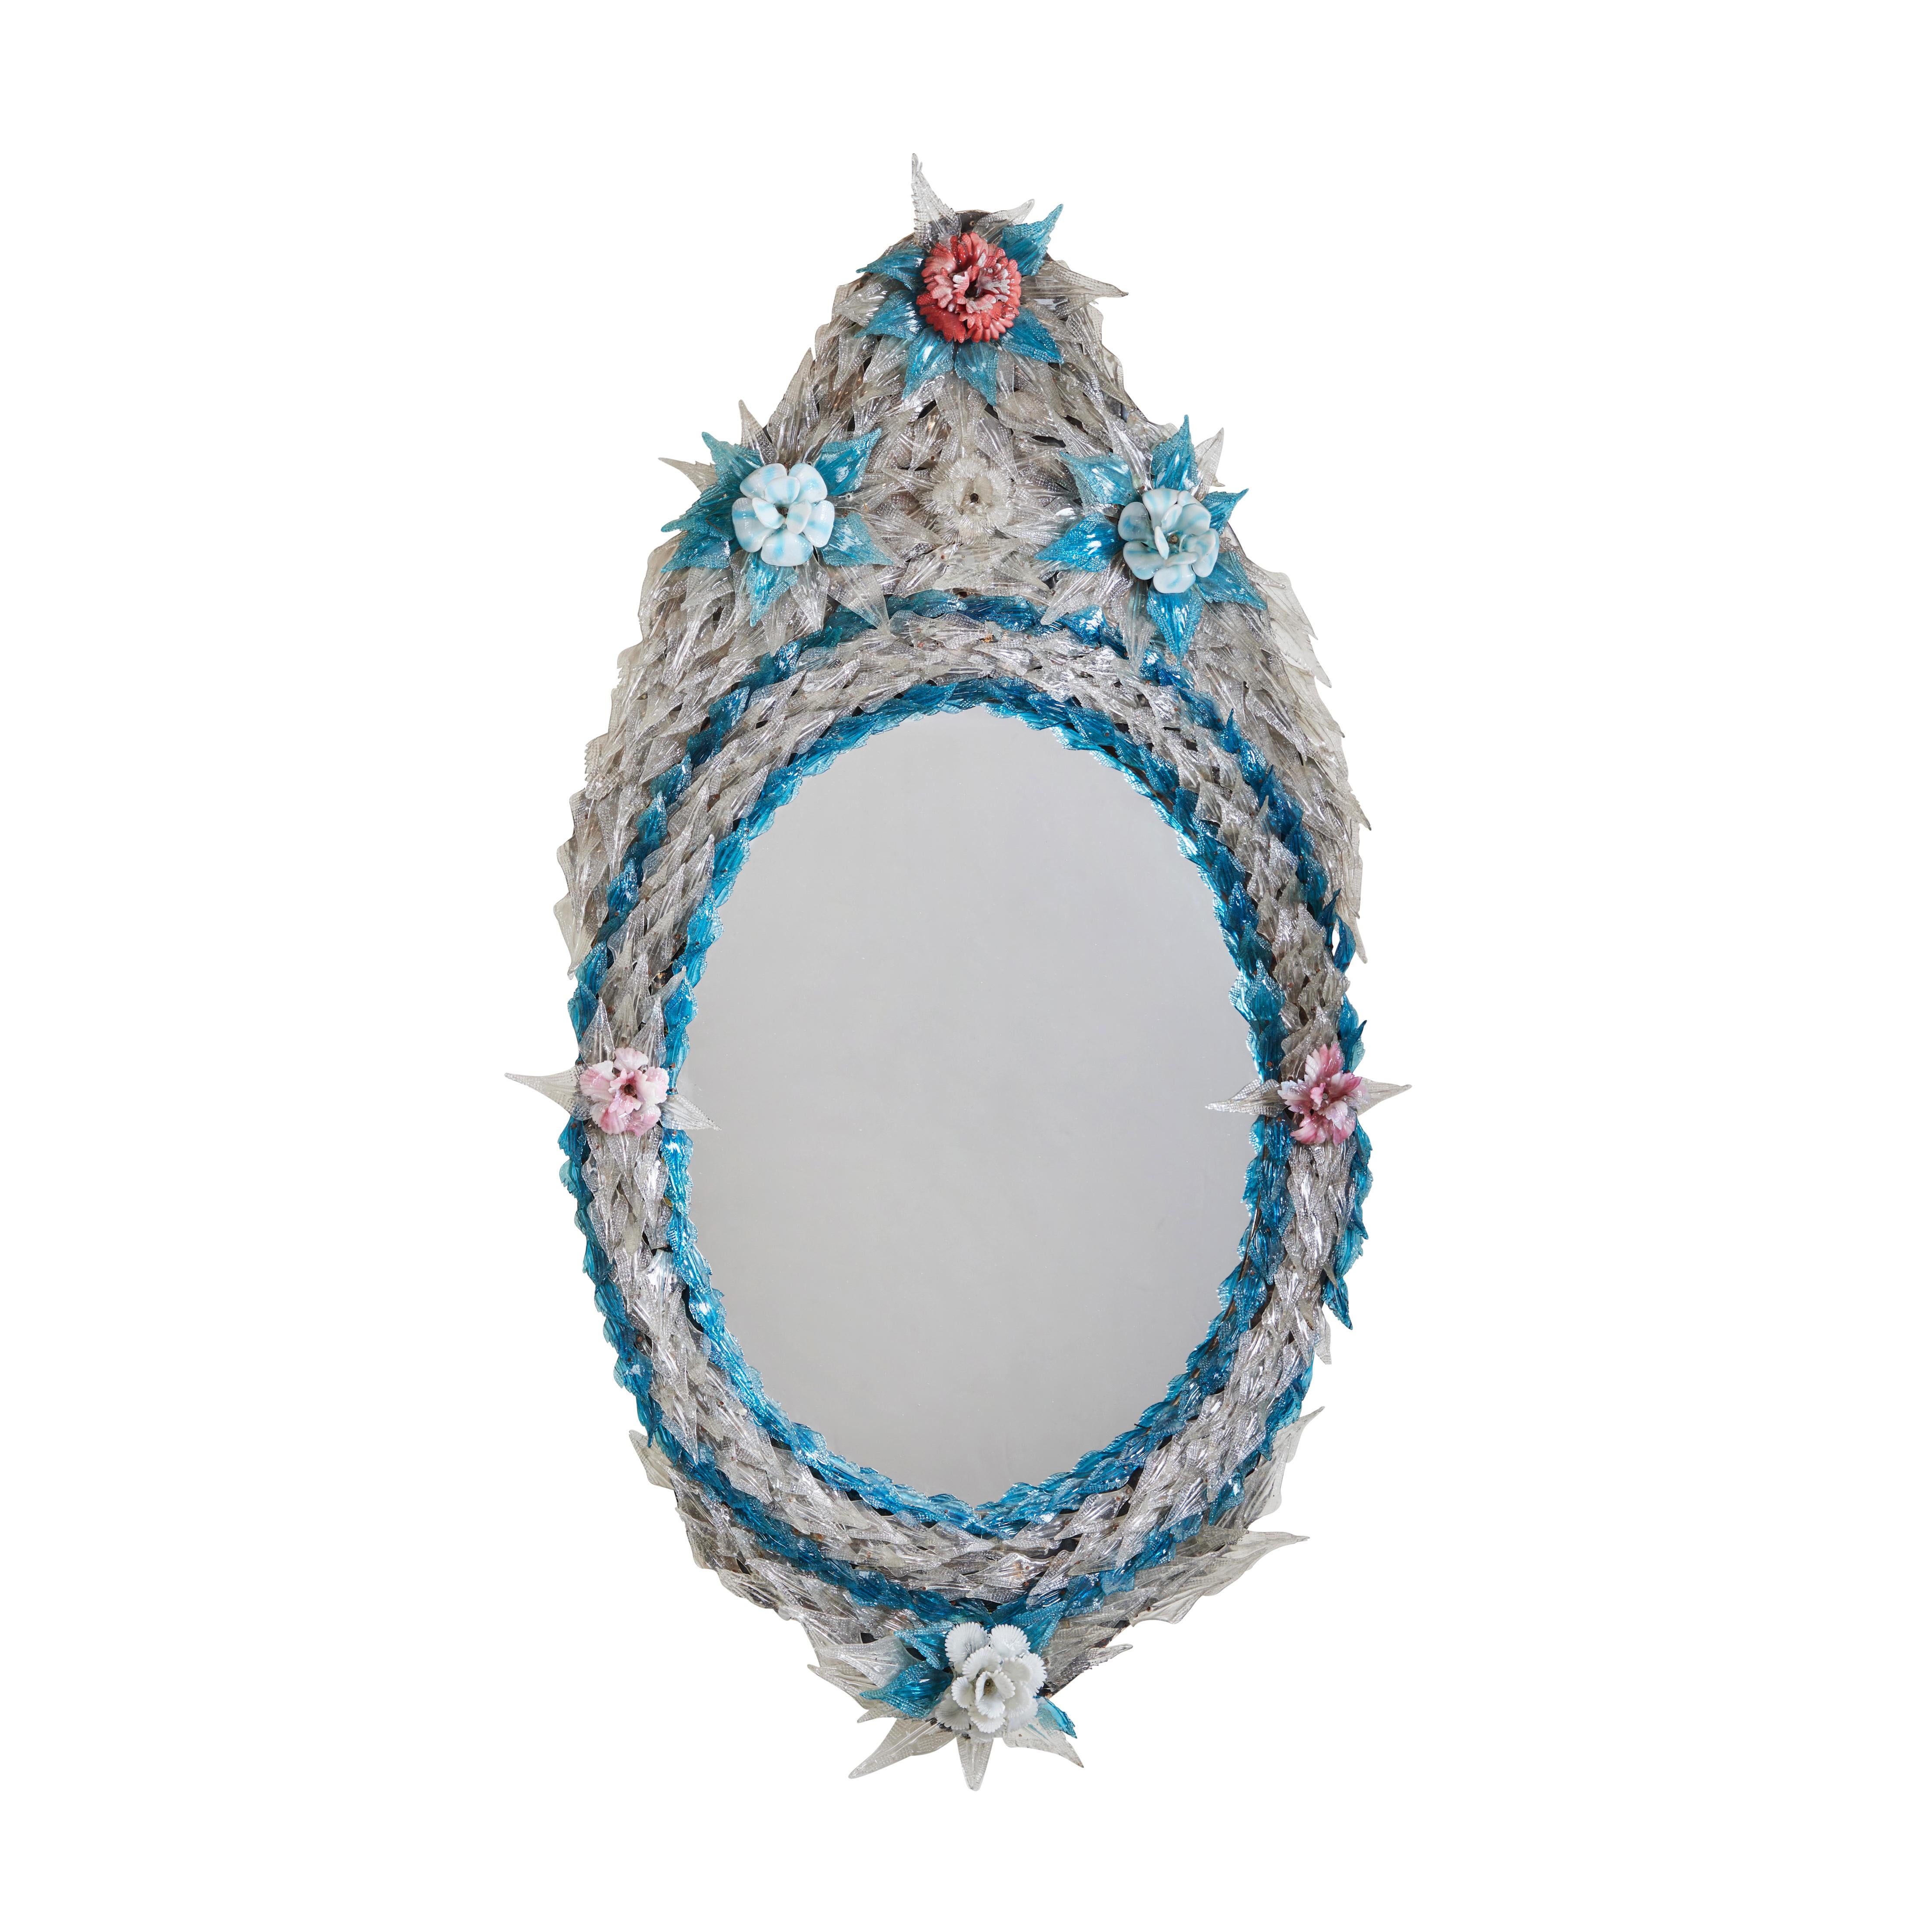 A near pair of oval Venetian mirrors covered in glass leaves, embellished with flowers. Can be sold separately.